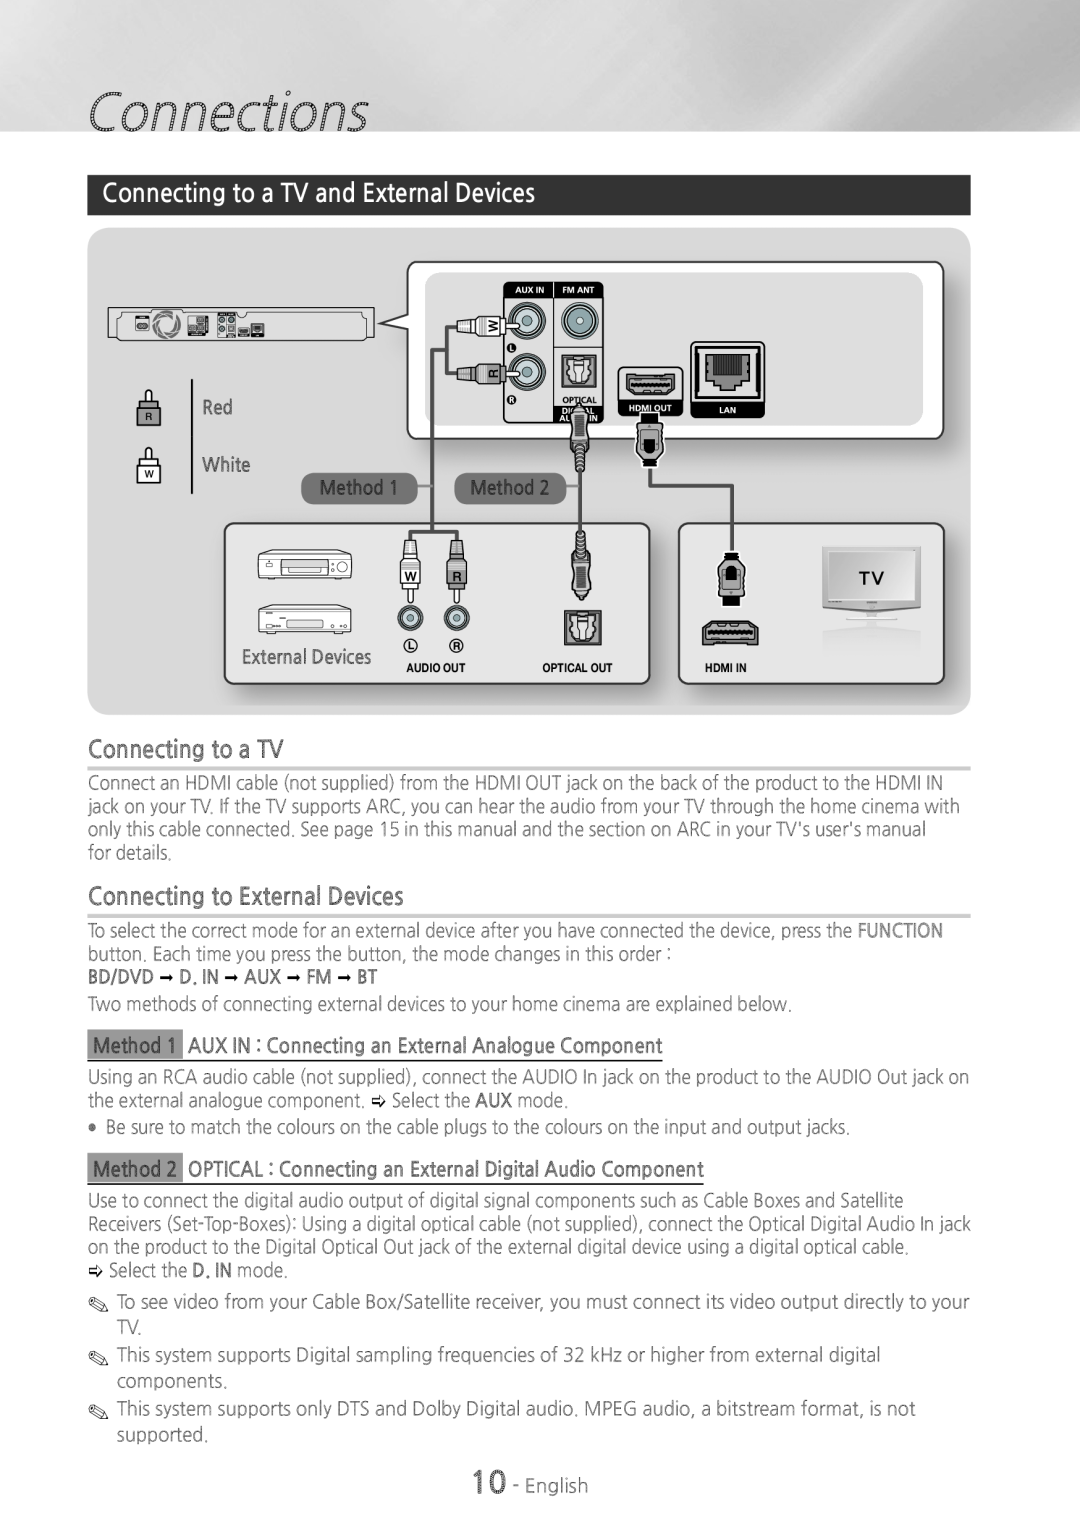 Samsung HT-H5200, HT-HS5200 user manual Connecting to a TV and External Devices, Connecting to External Devices, Connections 